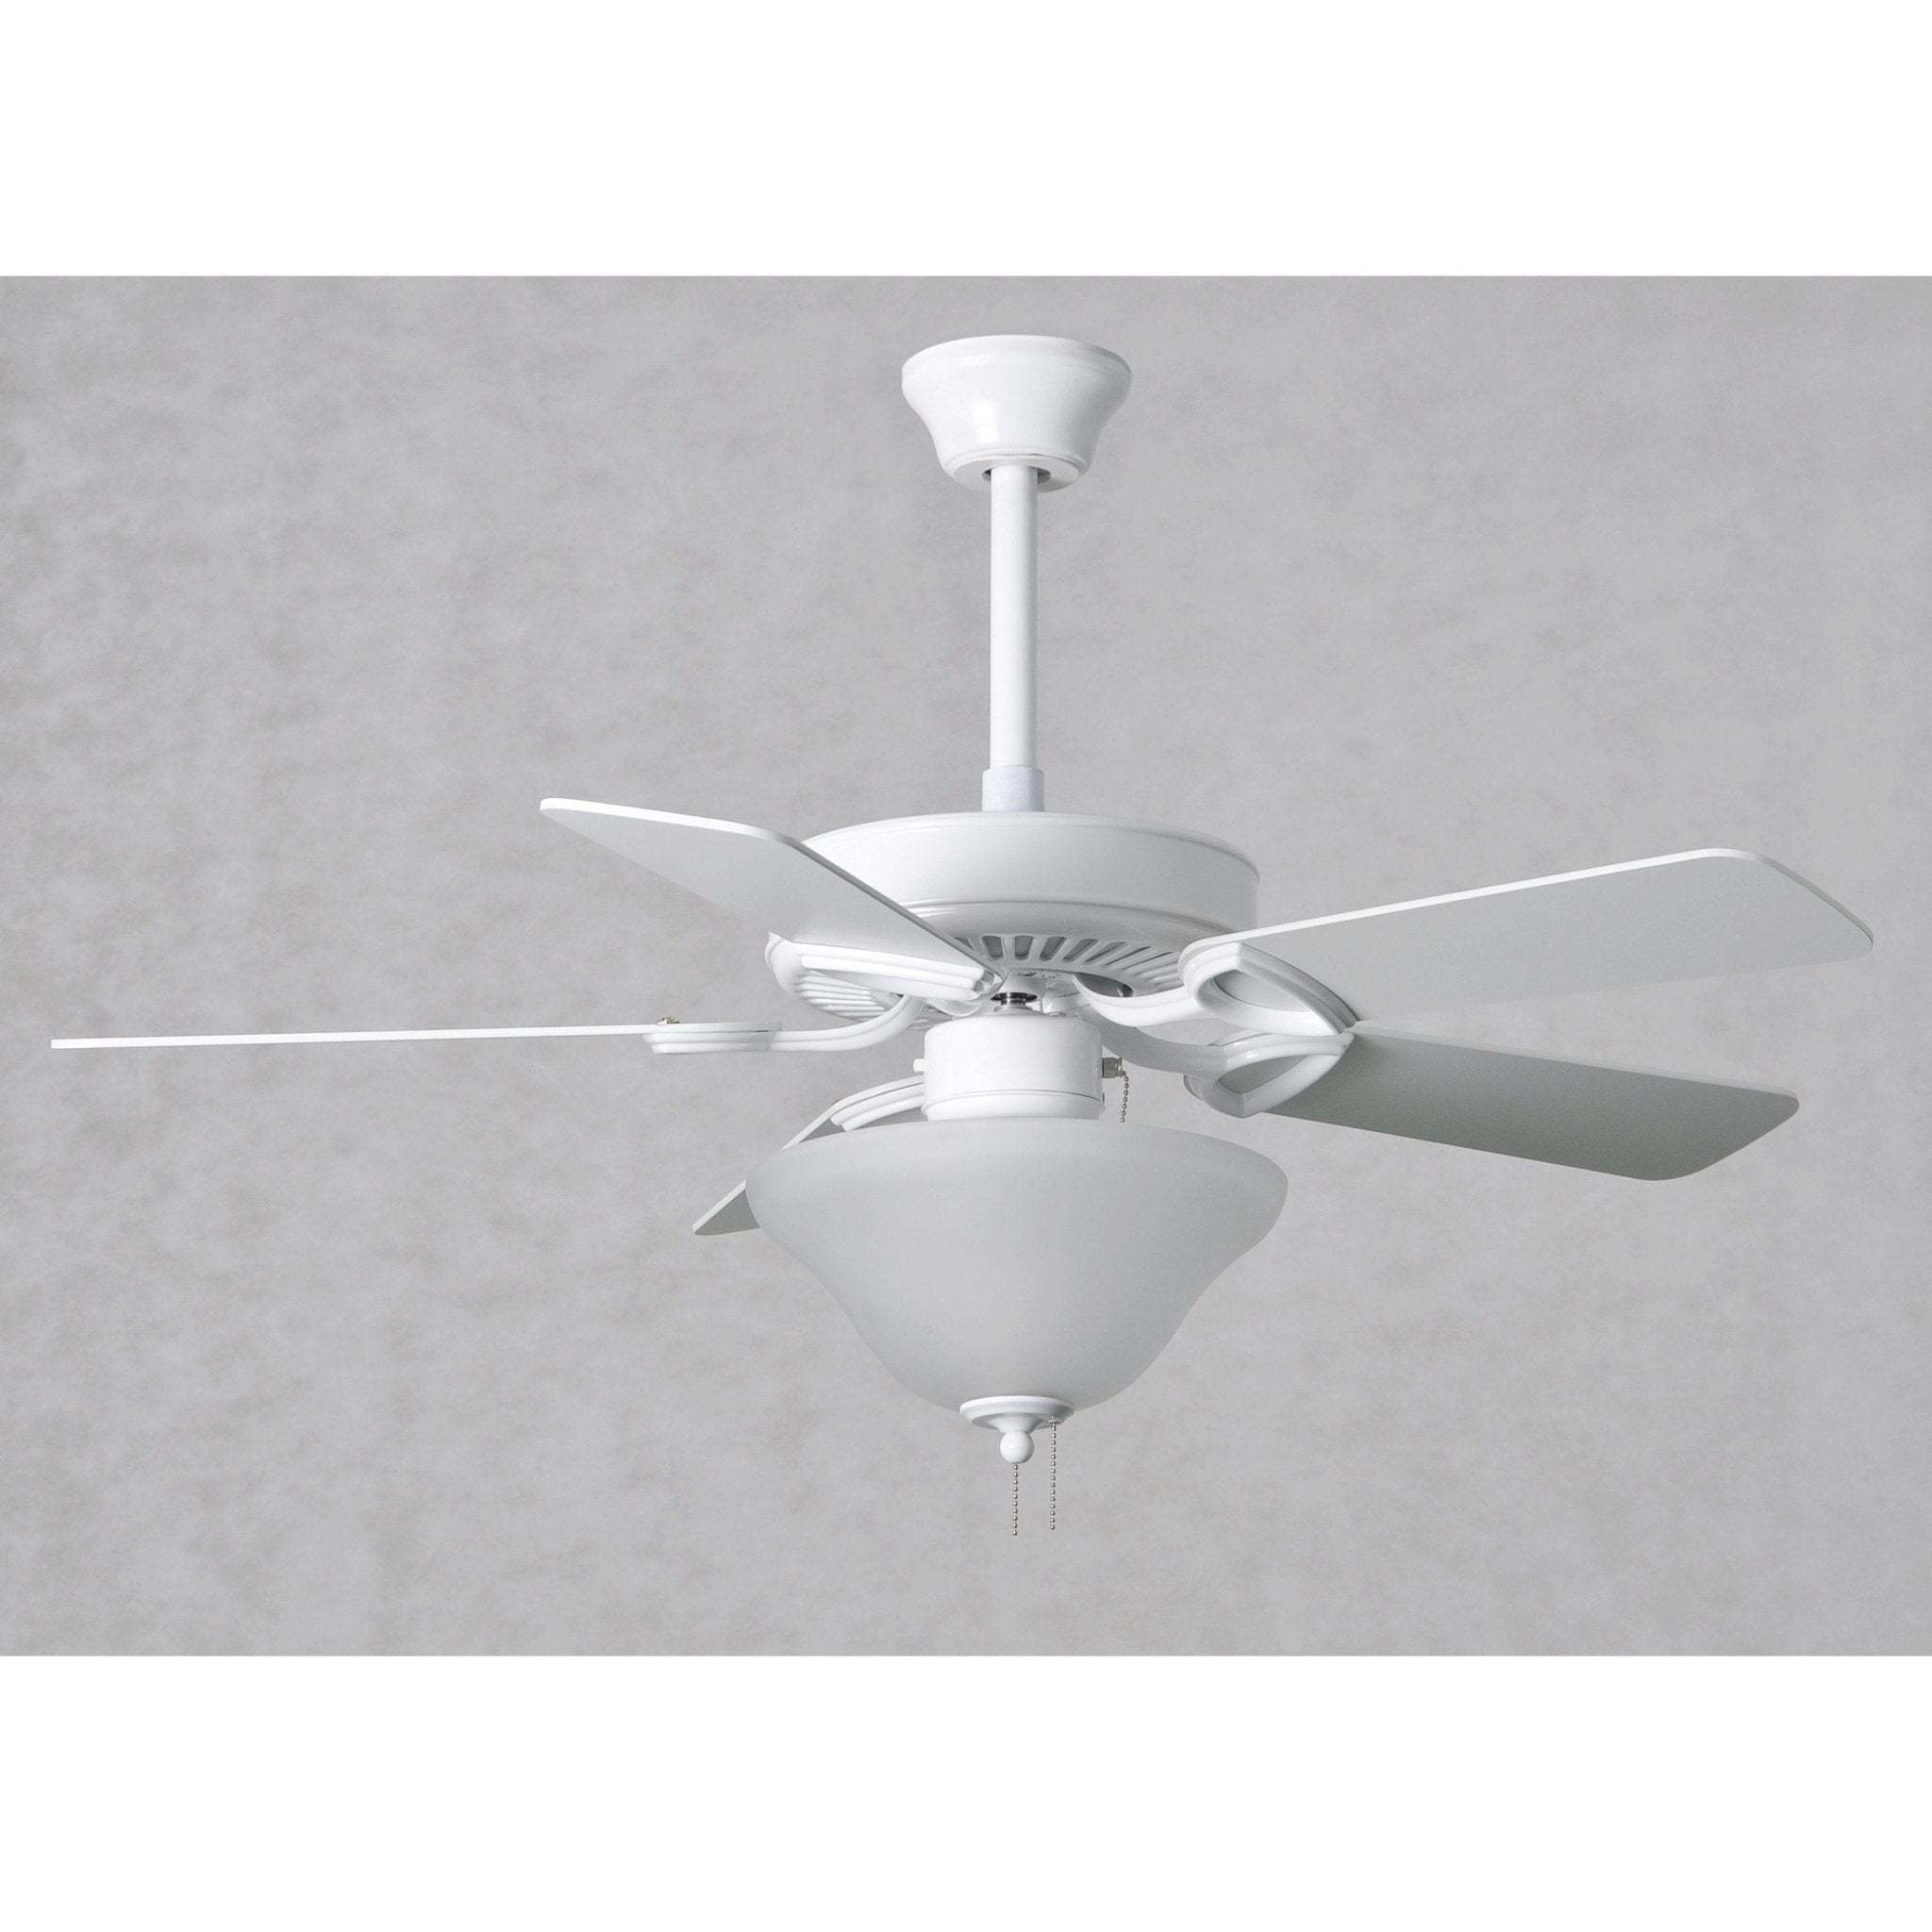 America Ceiling Fan With Light - USA Assembled - Image 1